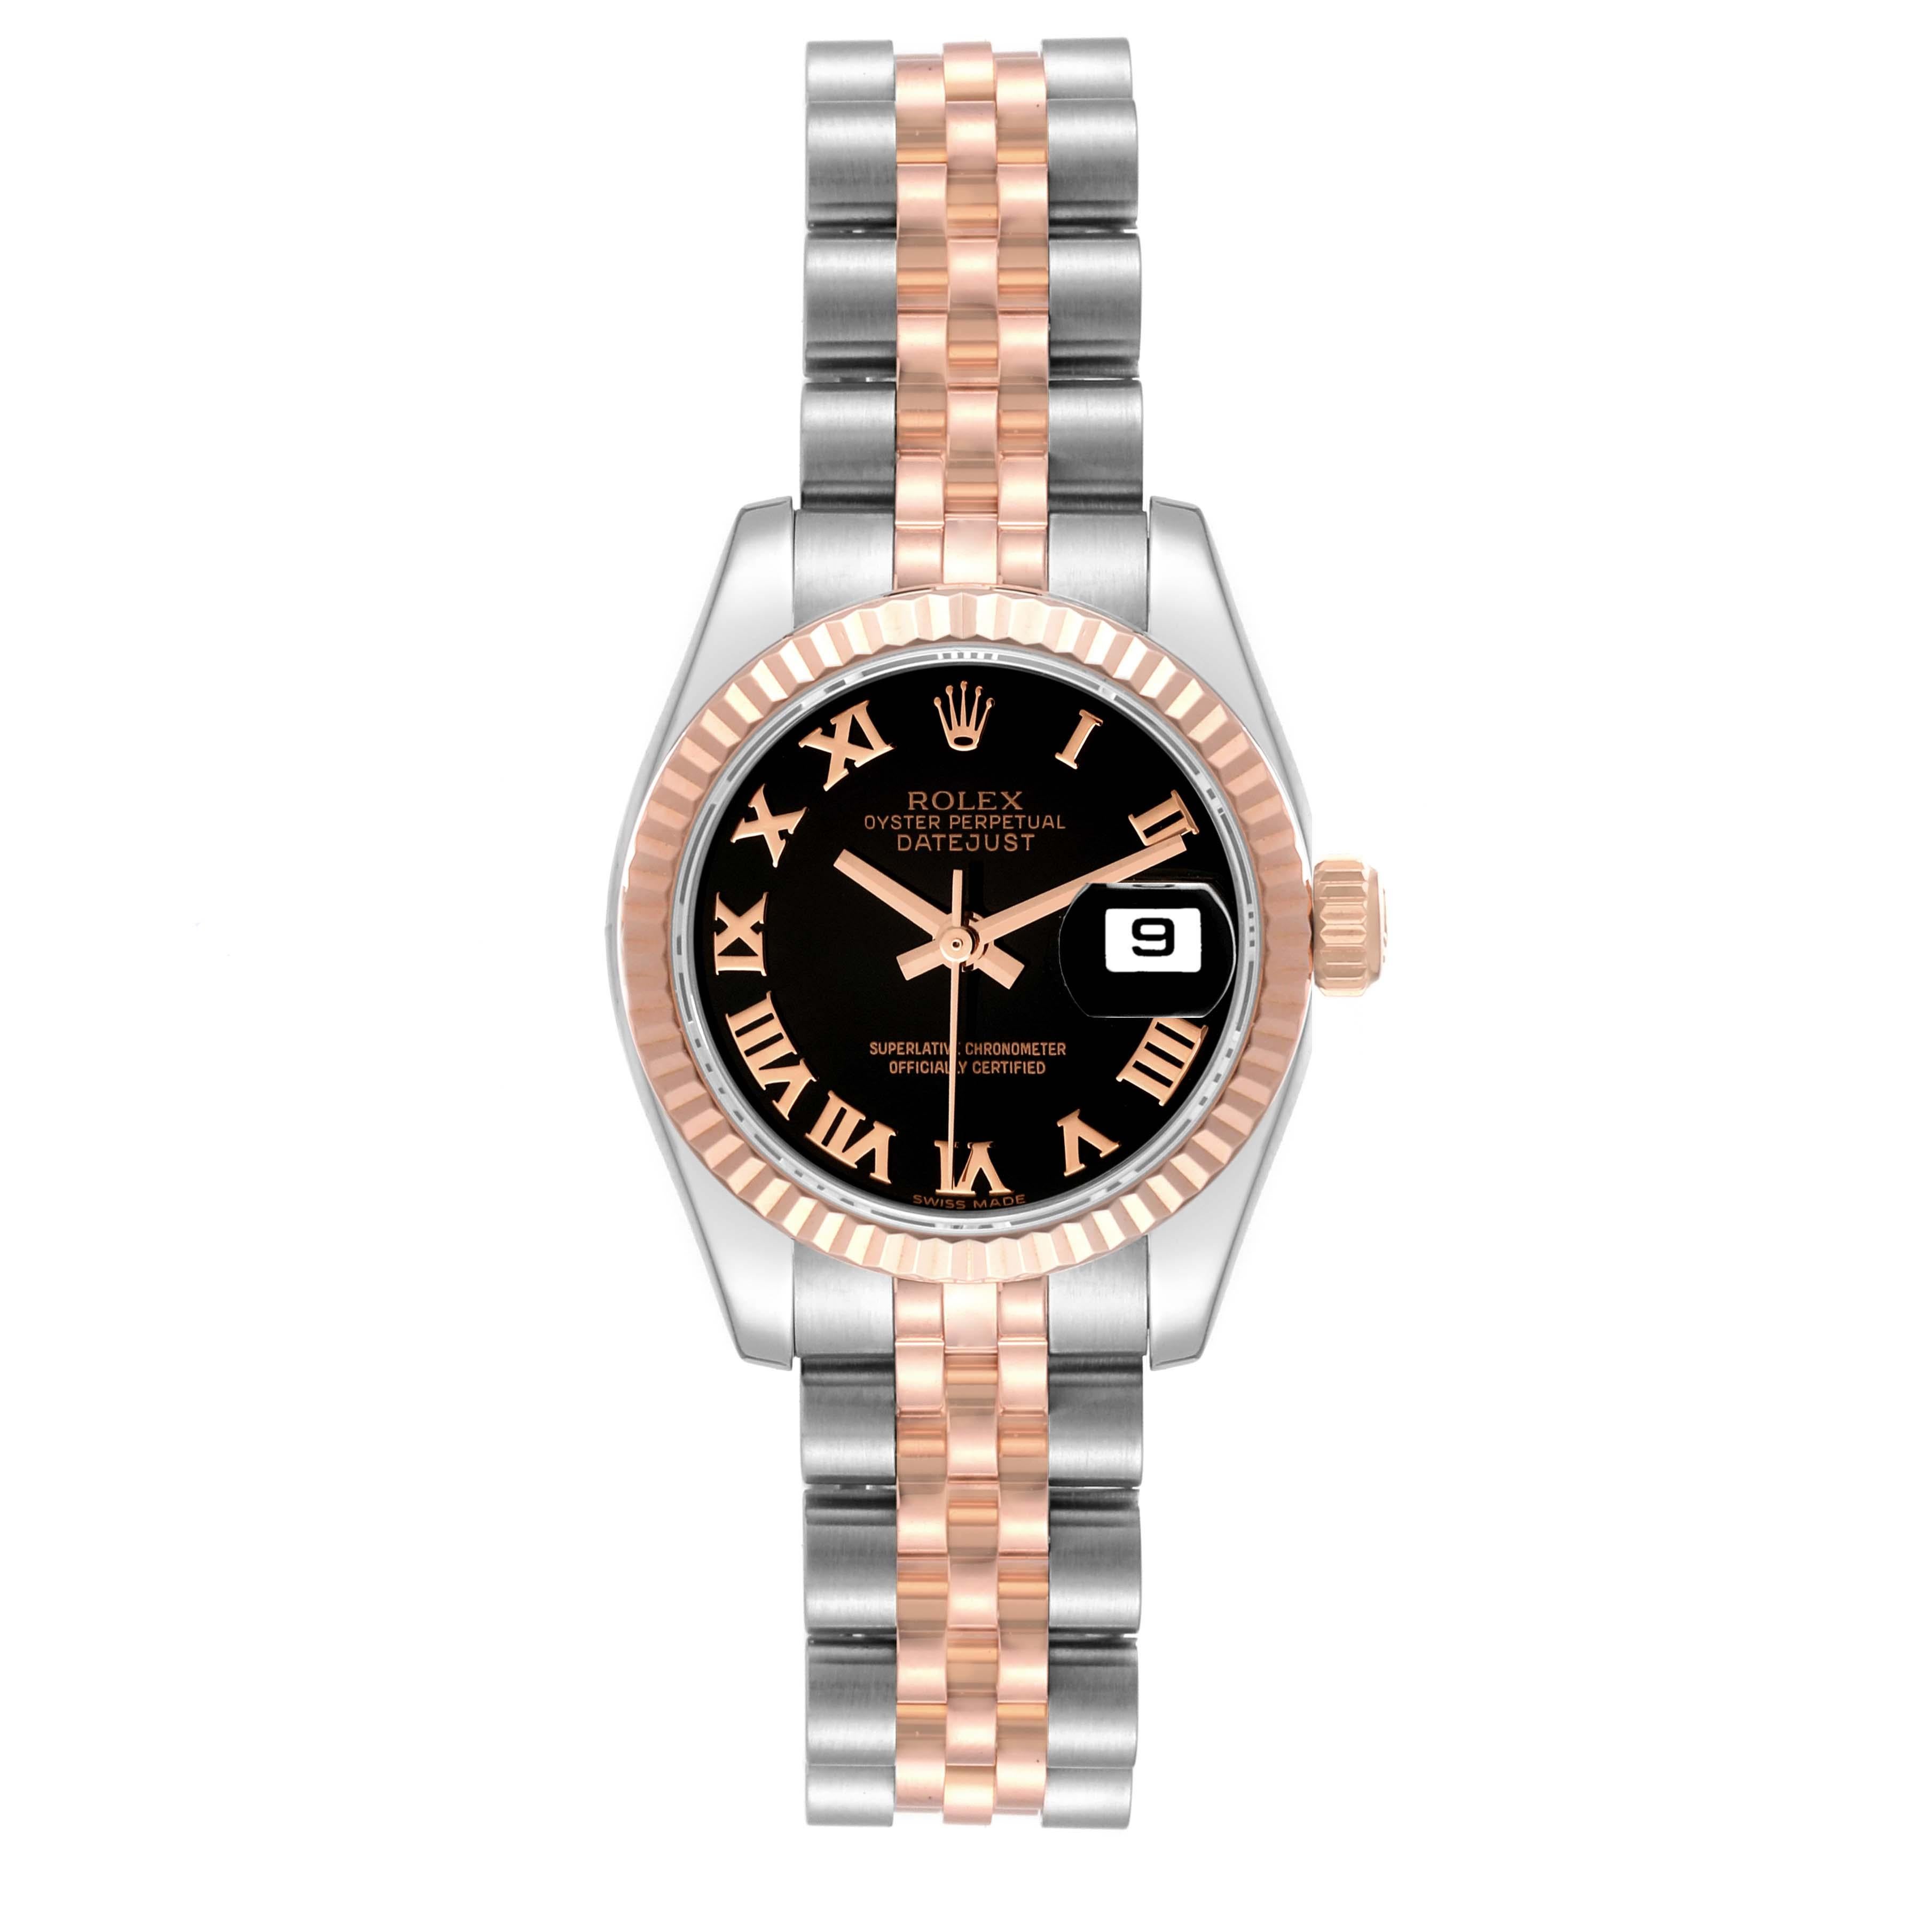 Rolex Datejust Steel Rose Gold Black Dial Ladies Watch 179171. Officially certified chronometer self-winding movement. Stainless steel oyster case 26.0 mm in diameter. Rolex logo on an 18K rose gold crown. 18k rose gold fluted bezel. Scratch